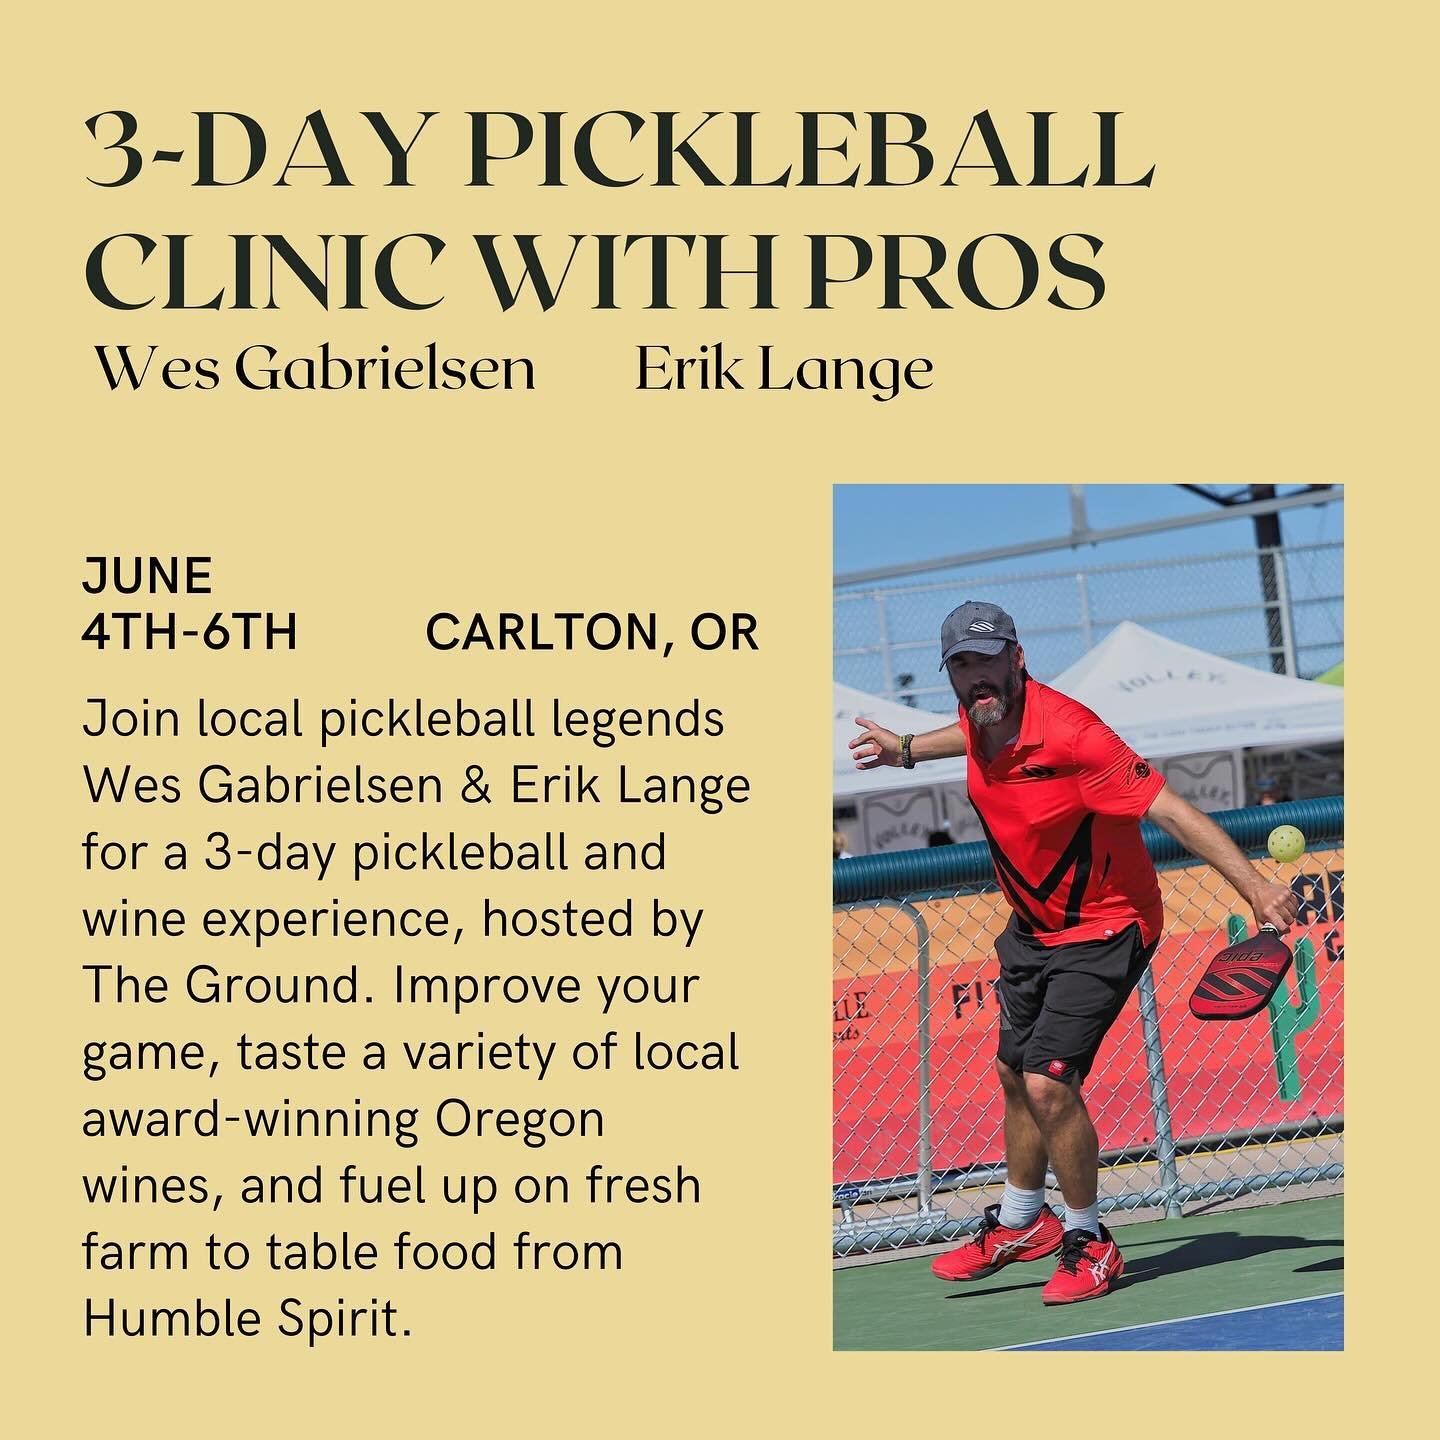 Pickleball &amp; wine lovers&mdash; we have the event for you! 

Join pickleball legends Wes Gabrielsen &amp; Eric Lange for a 3-day pickleball and wine experience! Open to all skill levels. Reserve your spot today ✨